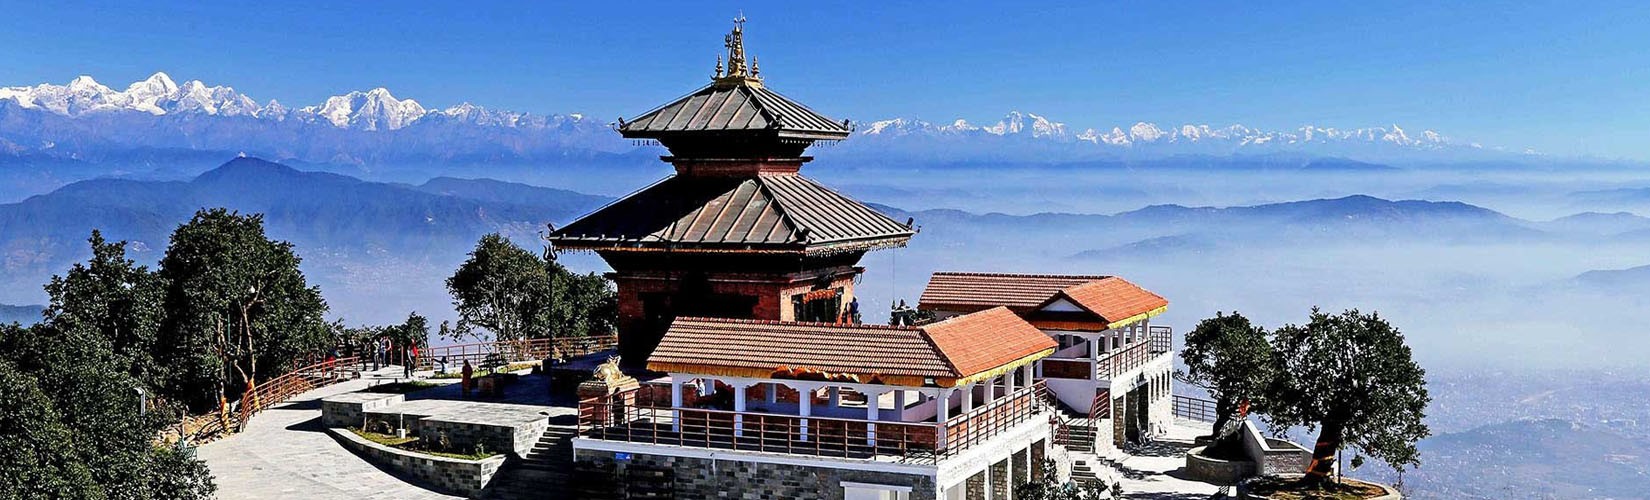 Nepal Education Tour package | Reasonable Treks And Tour 